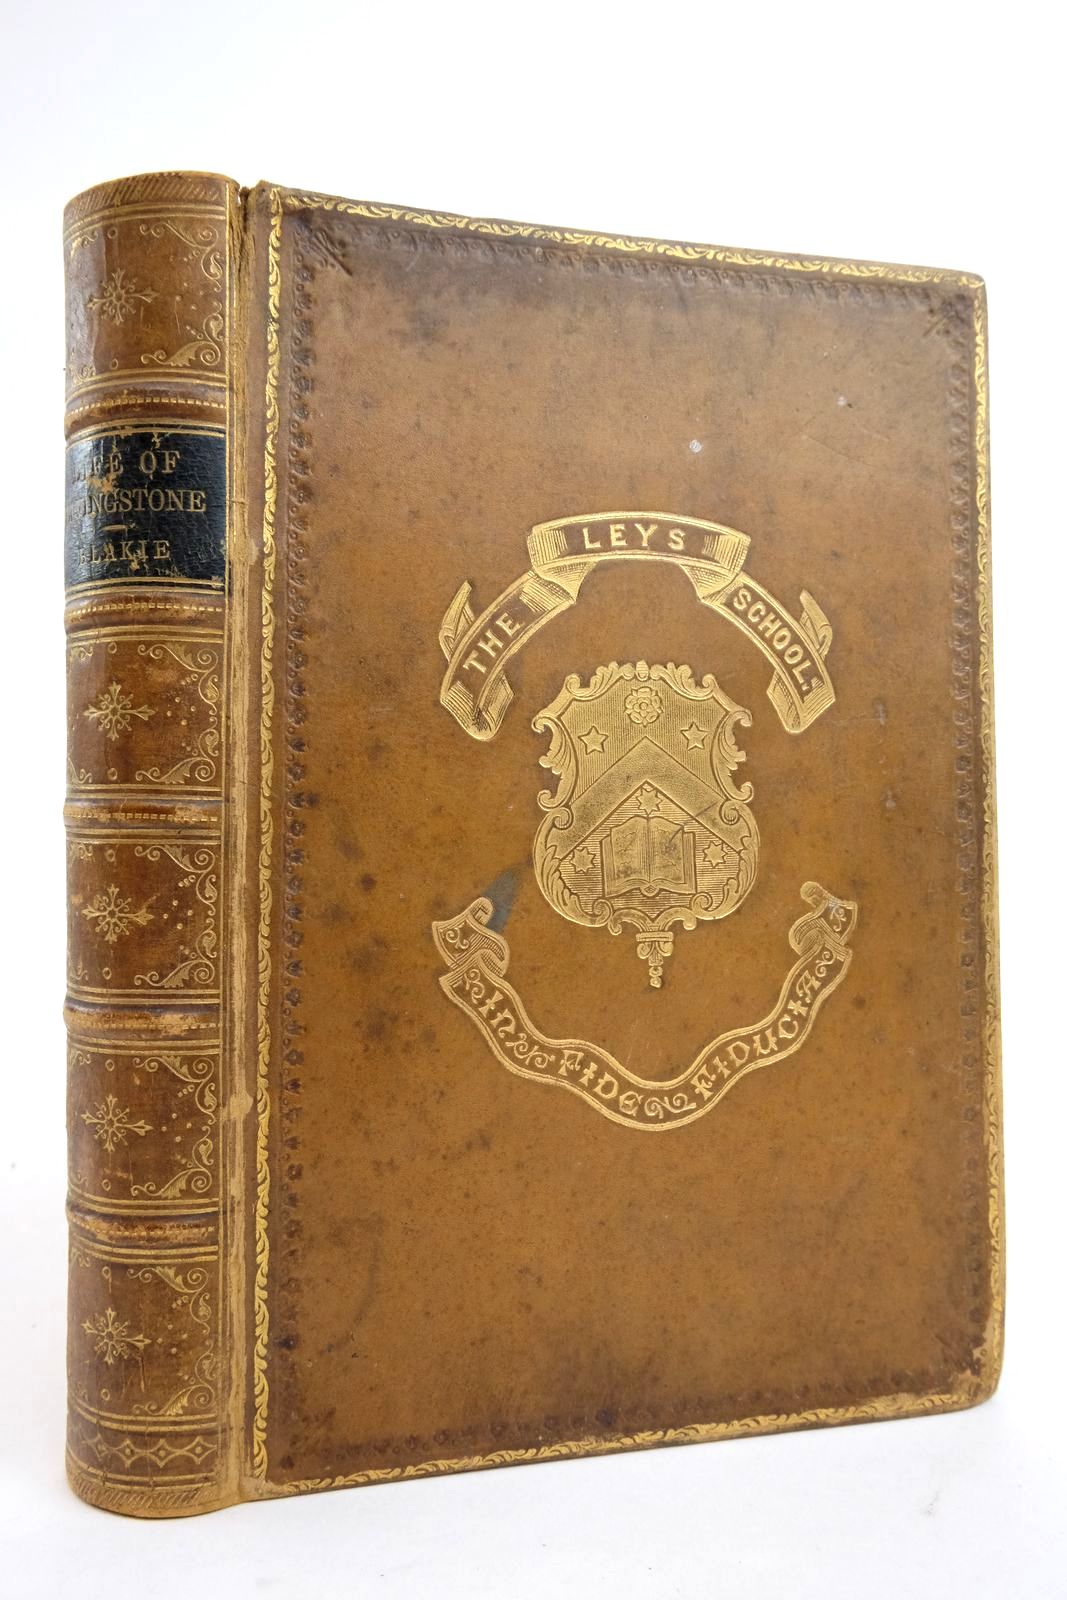 Photo of THE PERSONAL LIFE OF DAVID LIVINGSTONE written by Blaikie, W.G. published by John Murray (STOCK CODE: 2136452)  for sale by Stella & Rose's Books